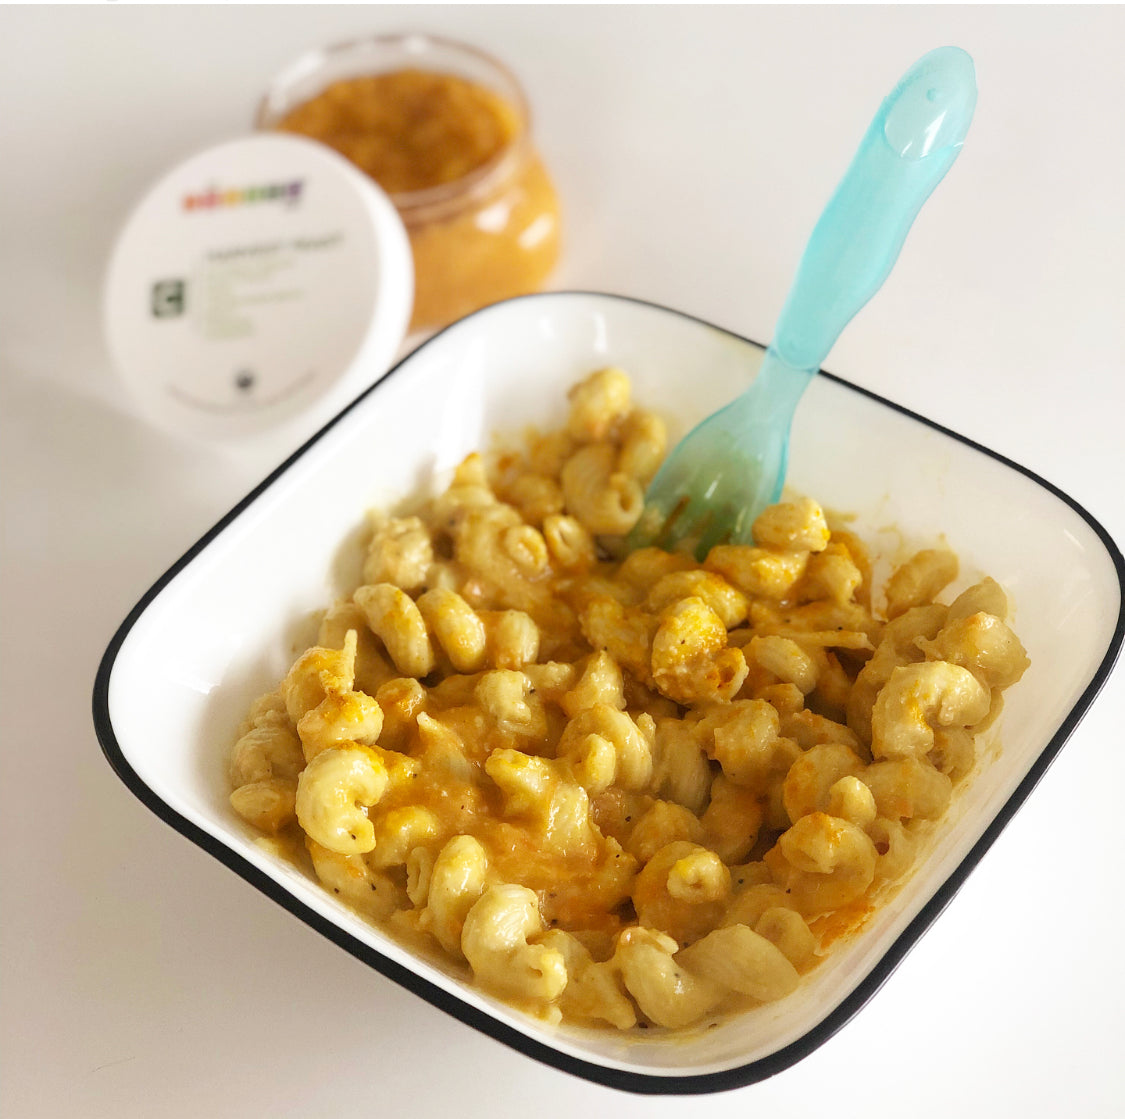 Baby led weaning - baby purees - Square Baby - fresh and organic baby food delivered